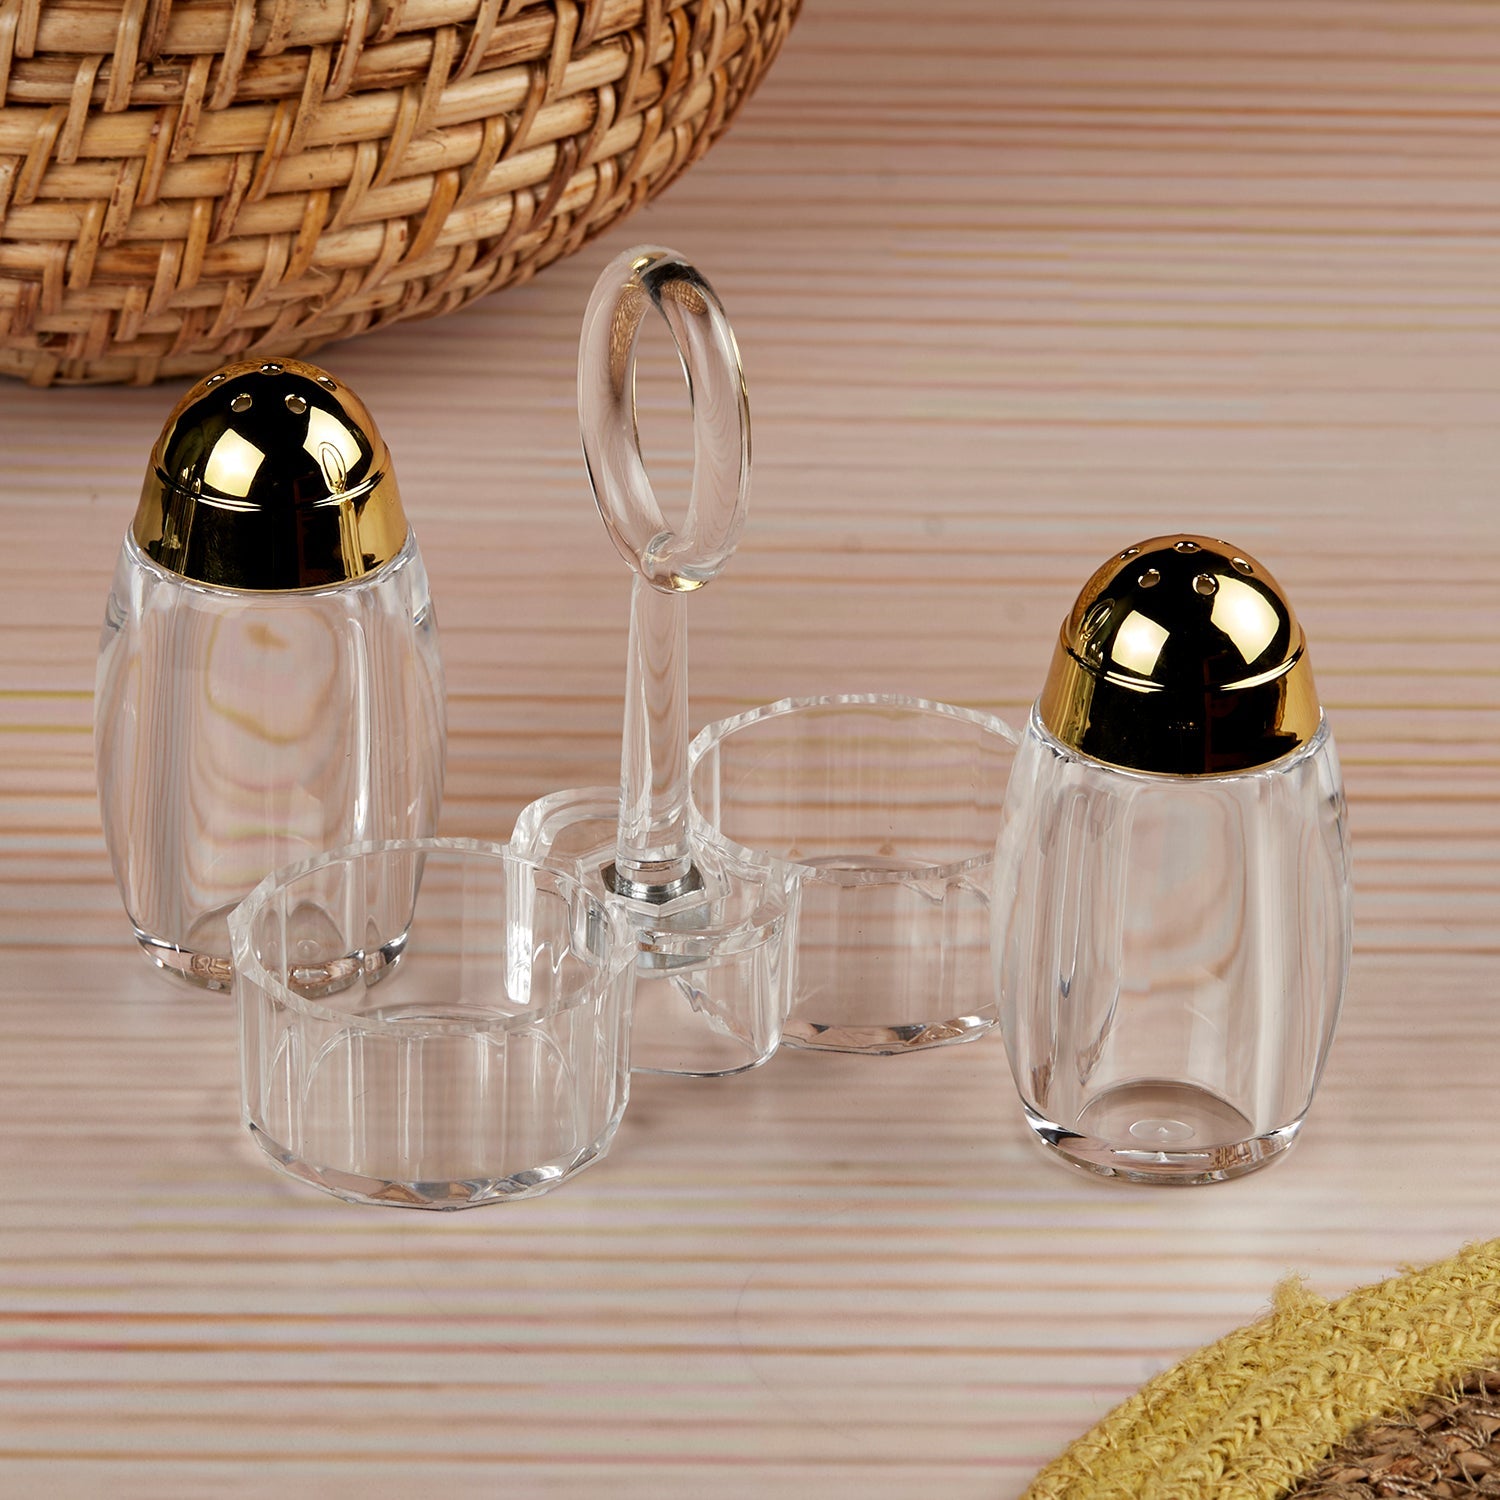 Kookee Acrylic Salt and Pepper Shakers Set with tray for Dining Table used as Namak Dhani, Shaker, Sprinkler, Spices Dispenser for Home, Kitchen and Restaurant, Transparent Gold (10706)